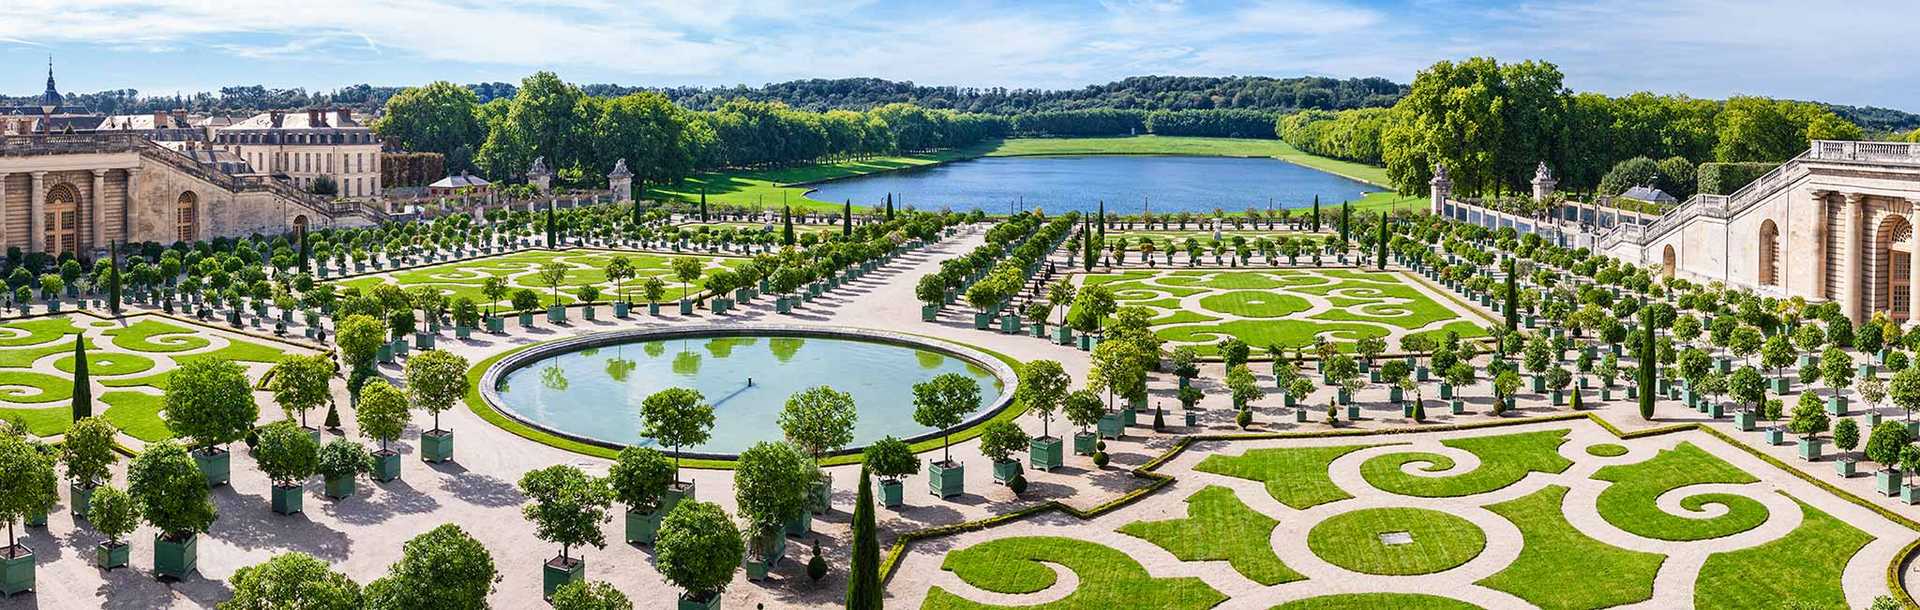 Palace of Versailles in Versailles, France